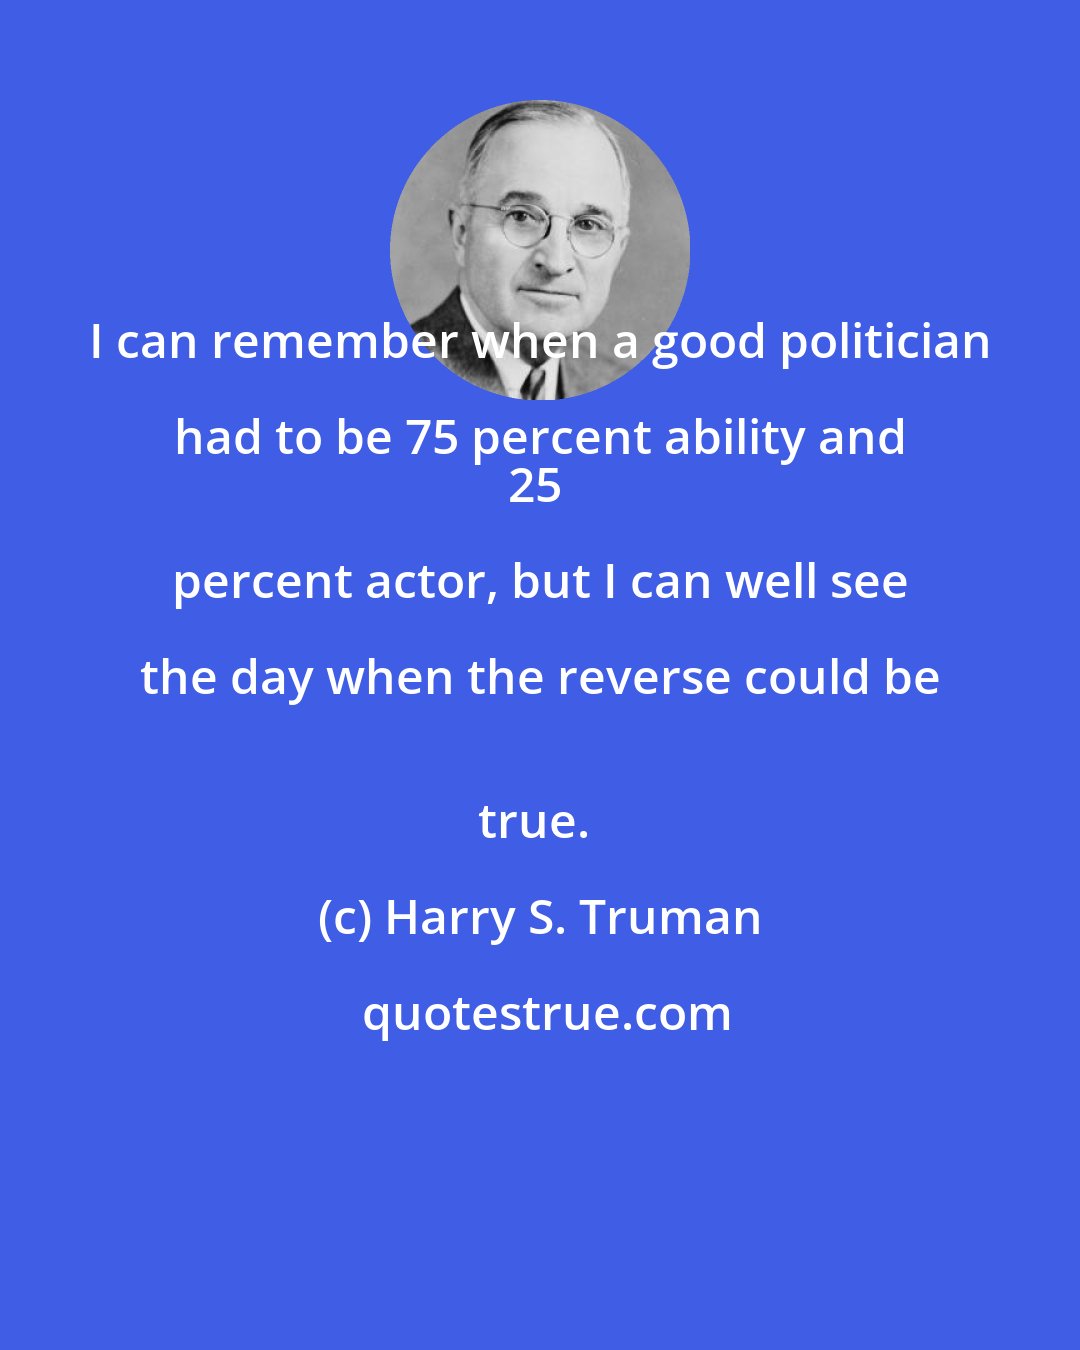 Harry S. Truman: I can remember when a good politician had to be 75 percent ability and 
25 percent actor, but I can well see the day when the reverse could be 
true.